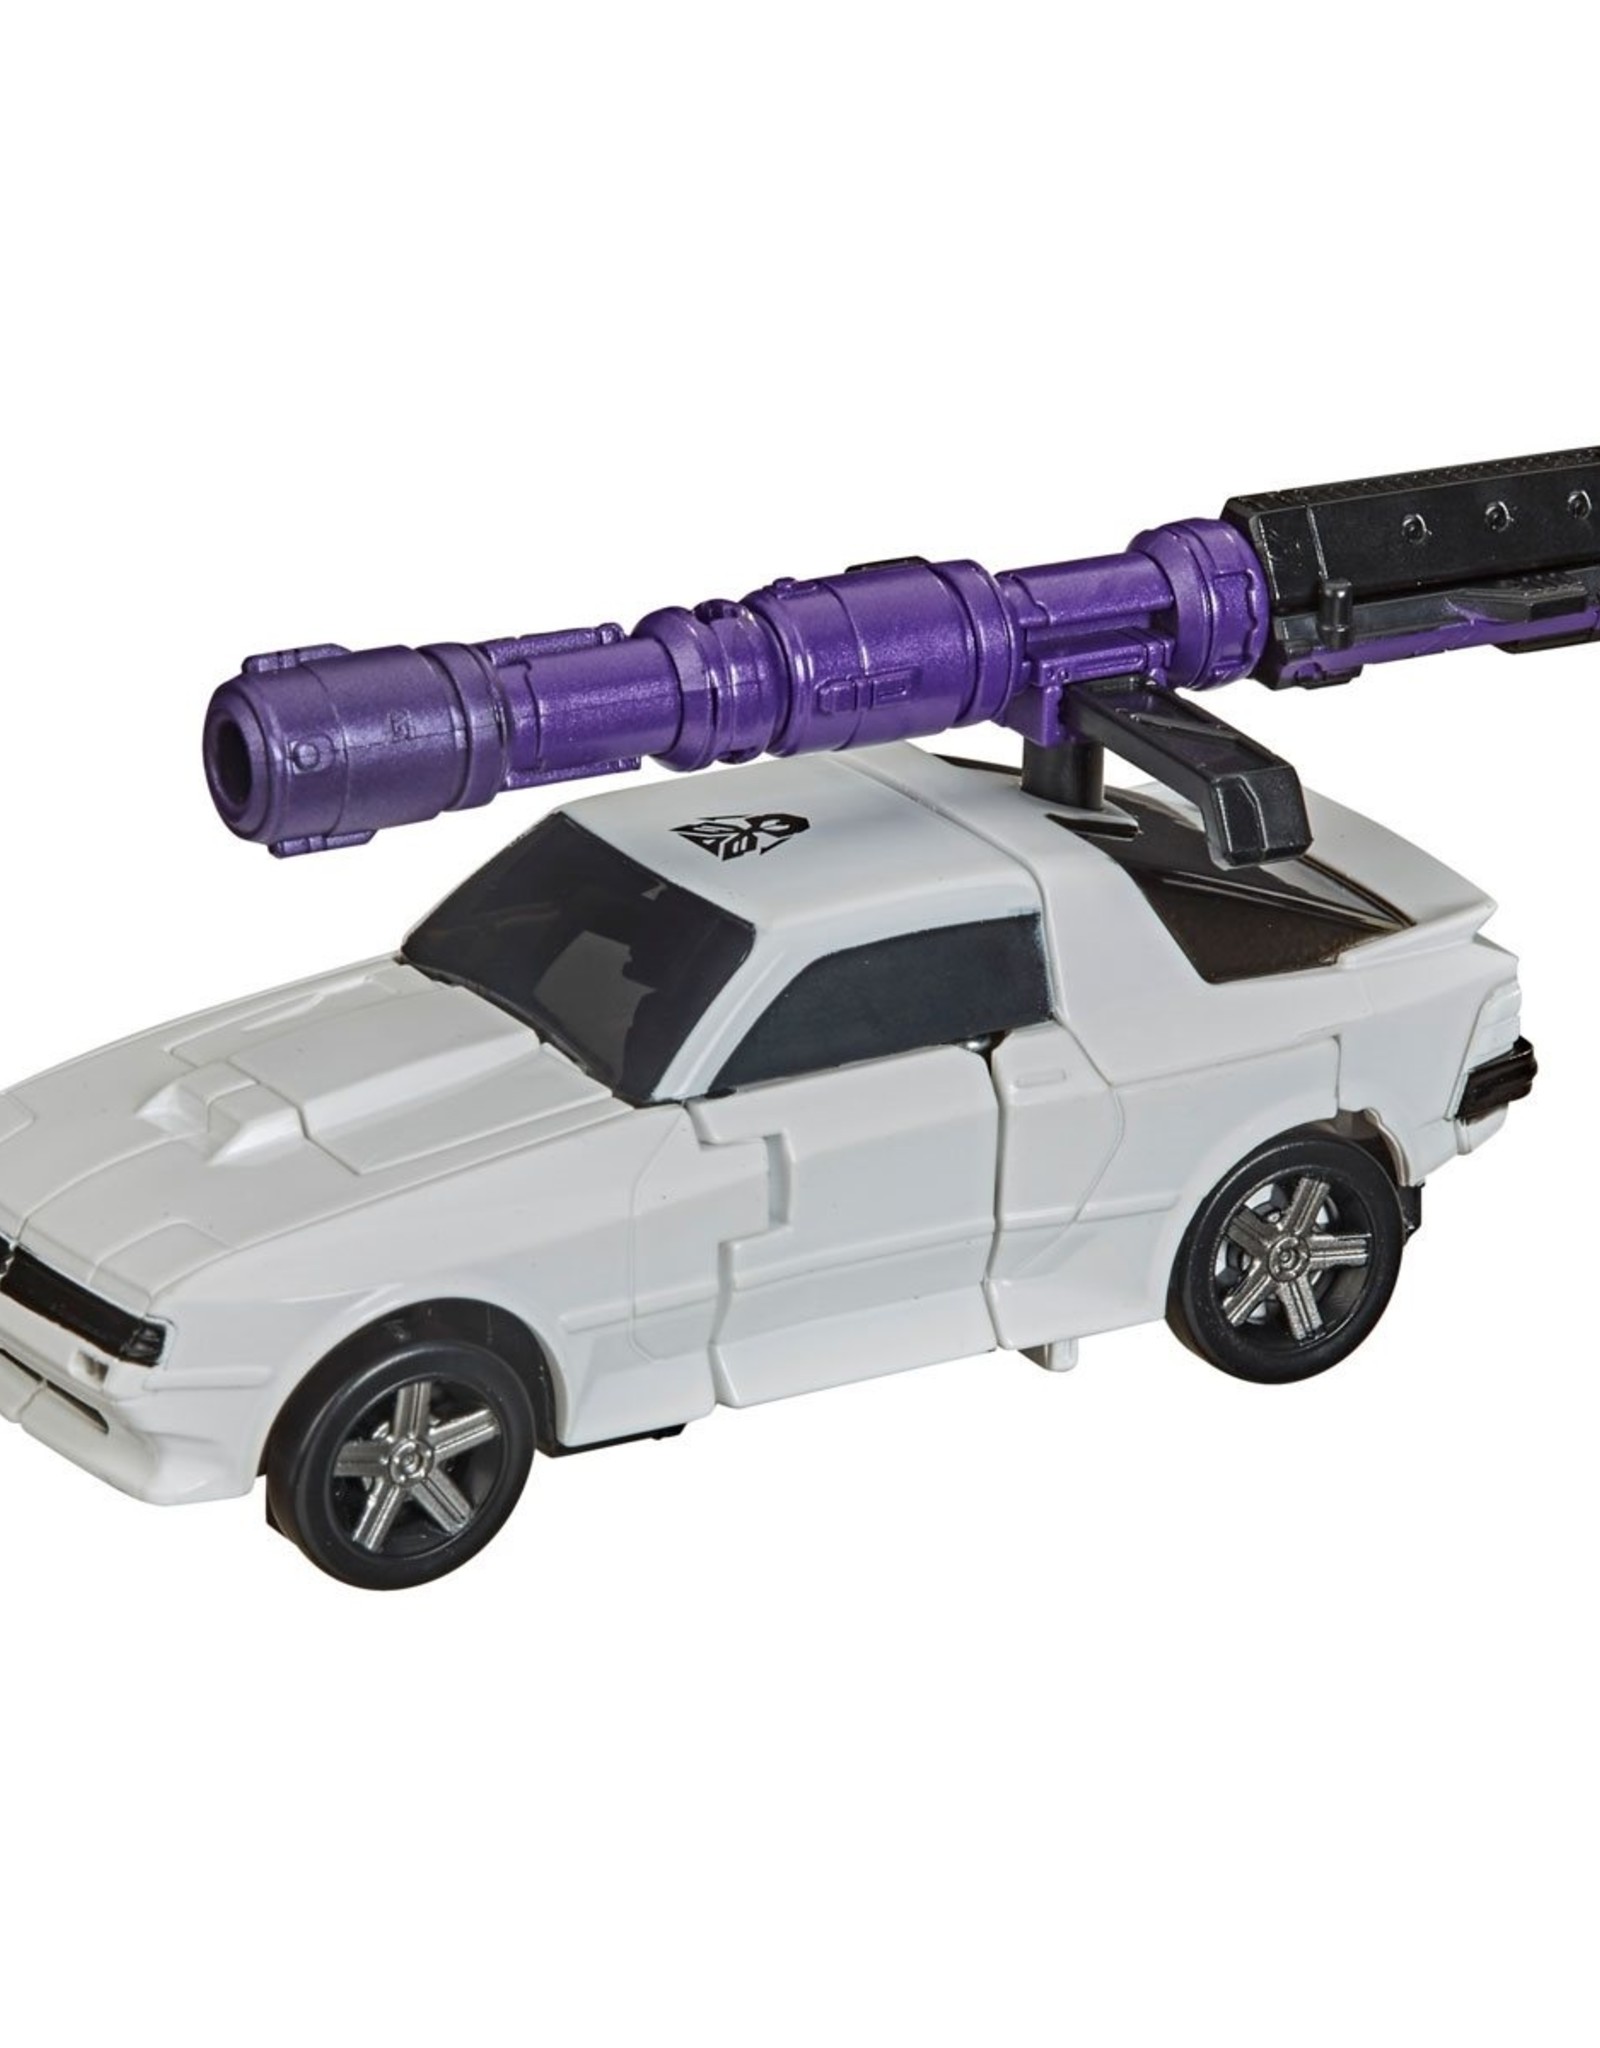 HASBRO Transformers Generations Selects War for Cybertron Earthrise Deluxe Bug Bite - Exclusive